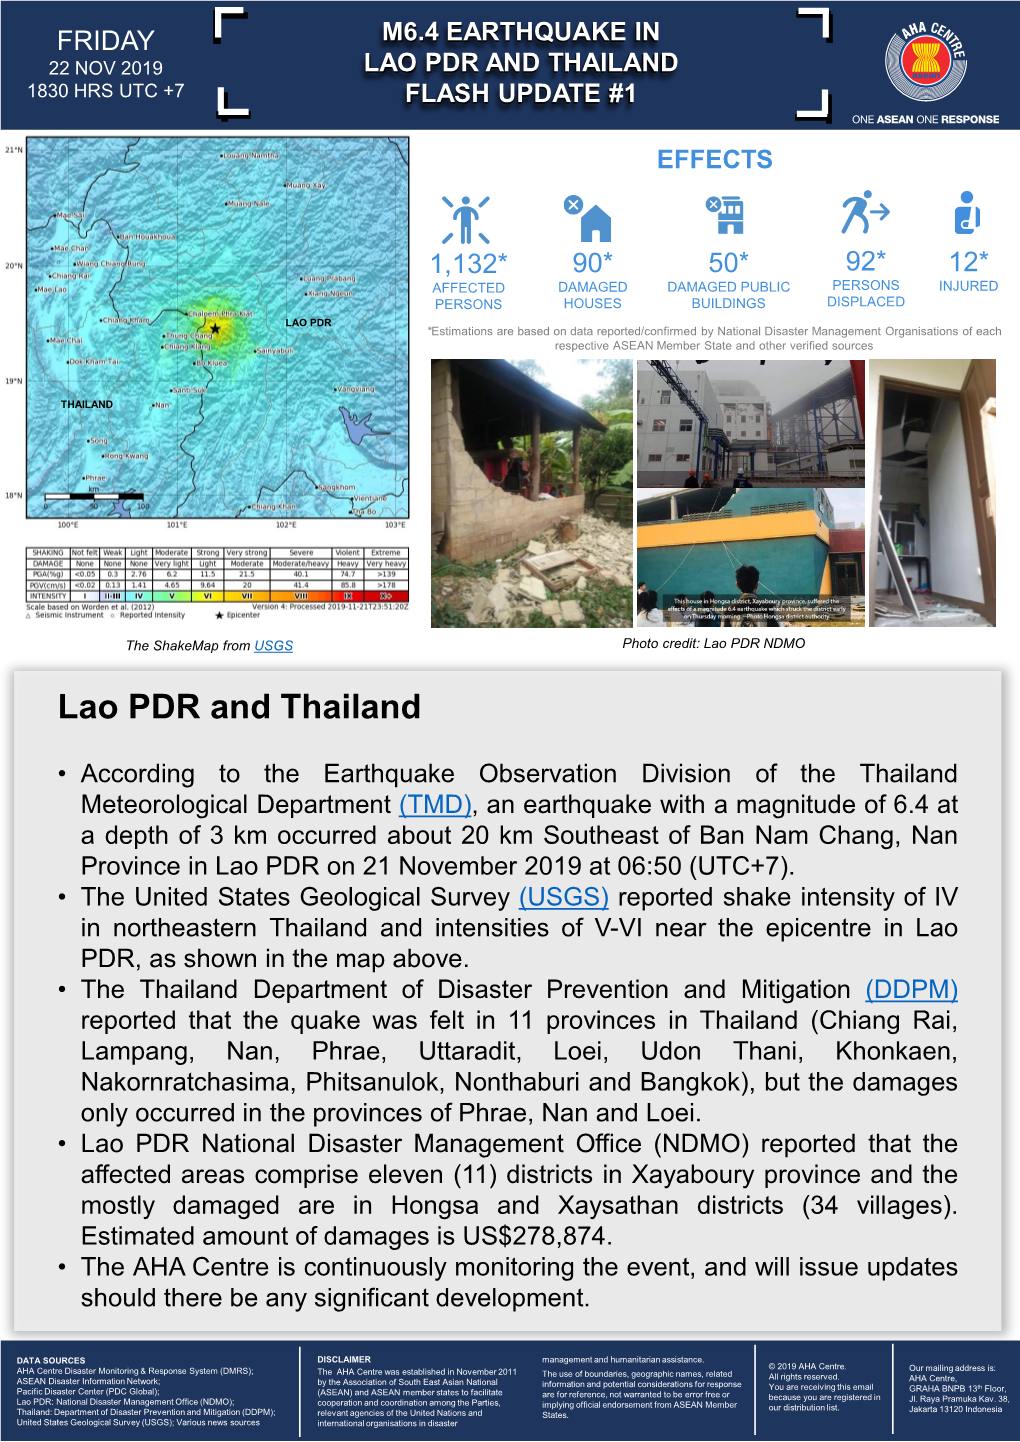 Lao Pdr and Thailand 1830 Hrs Utc +7 Flash Update #1